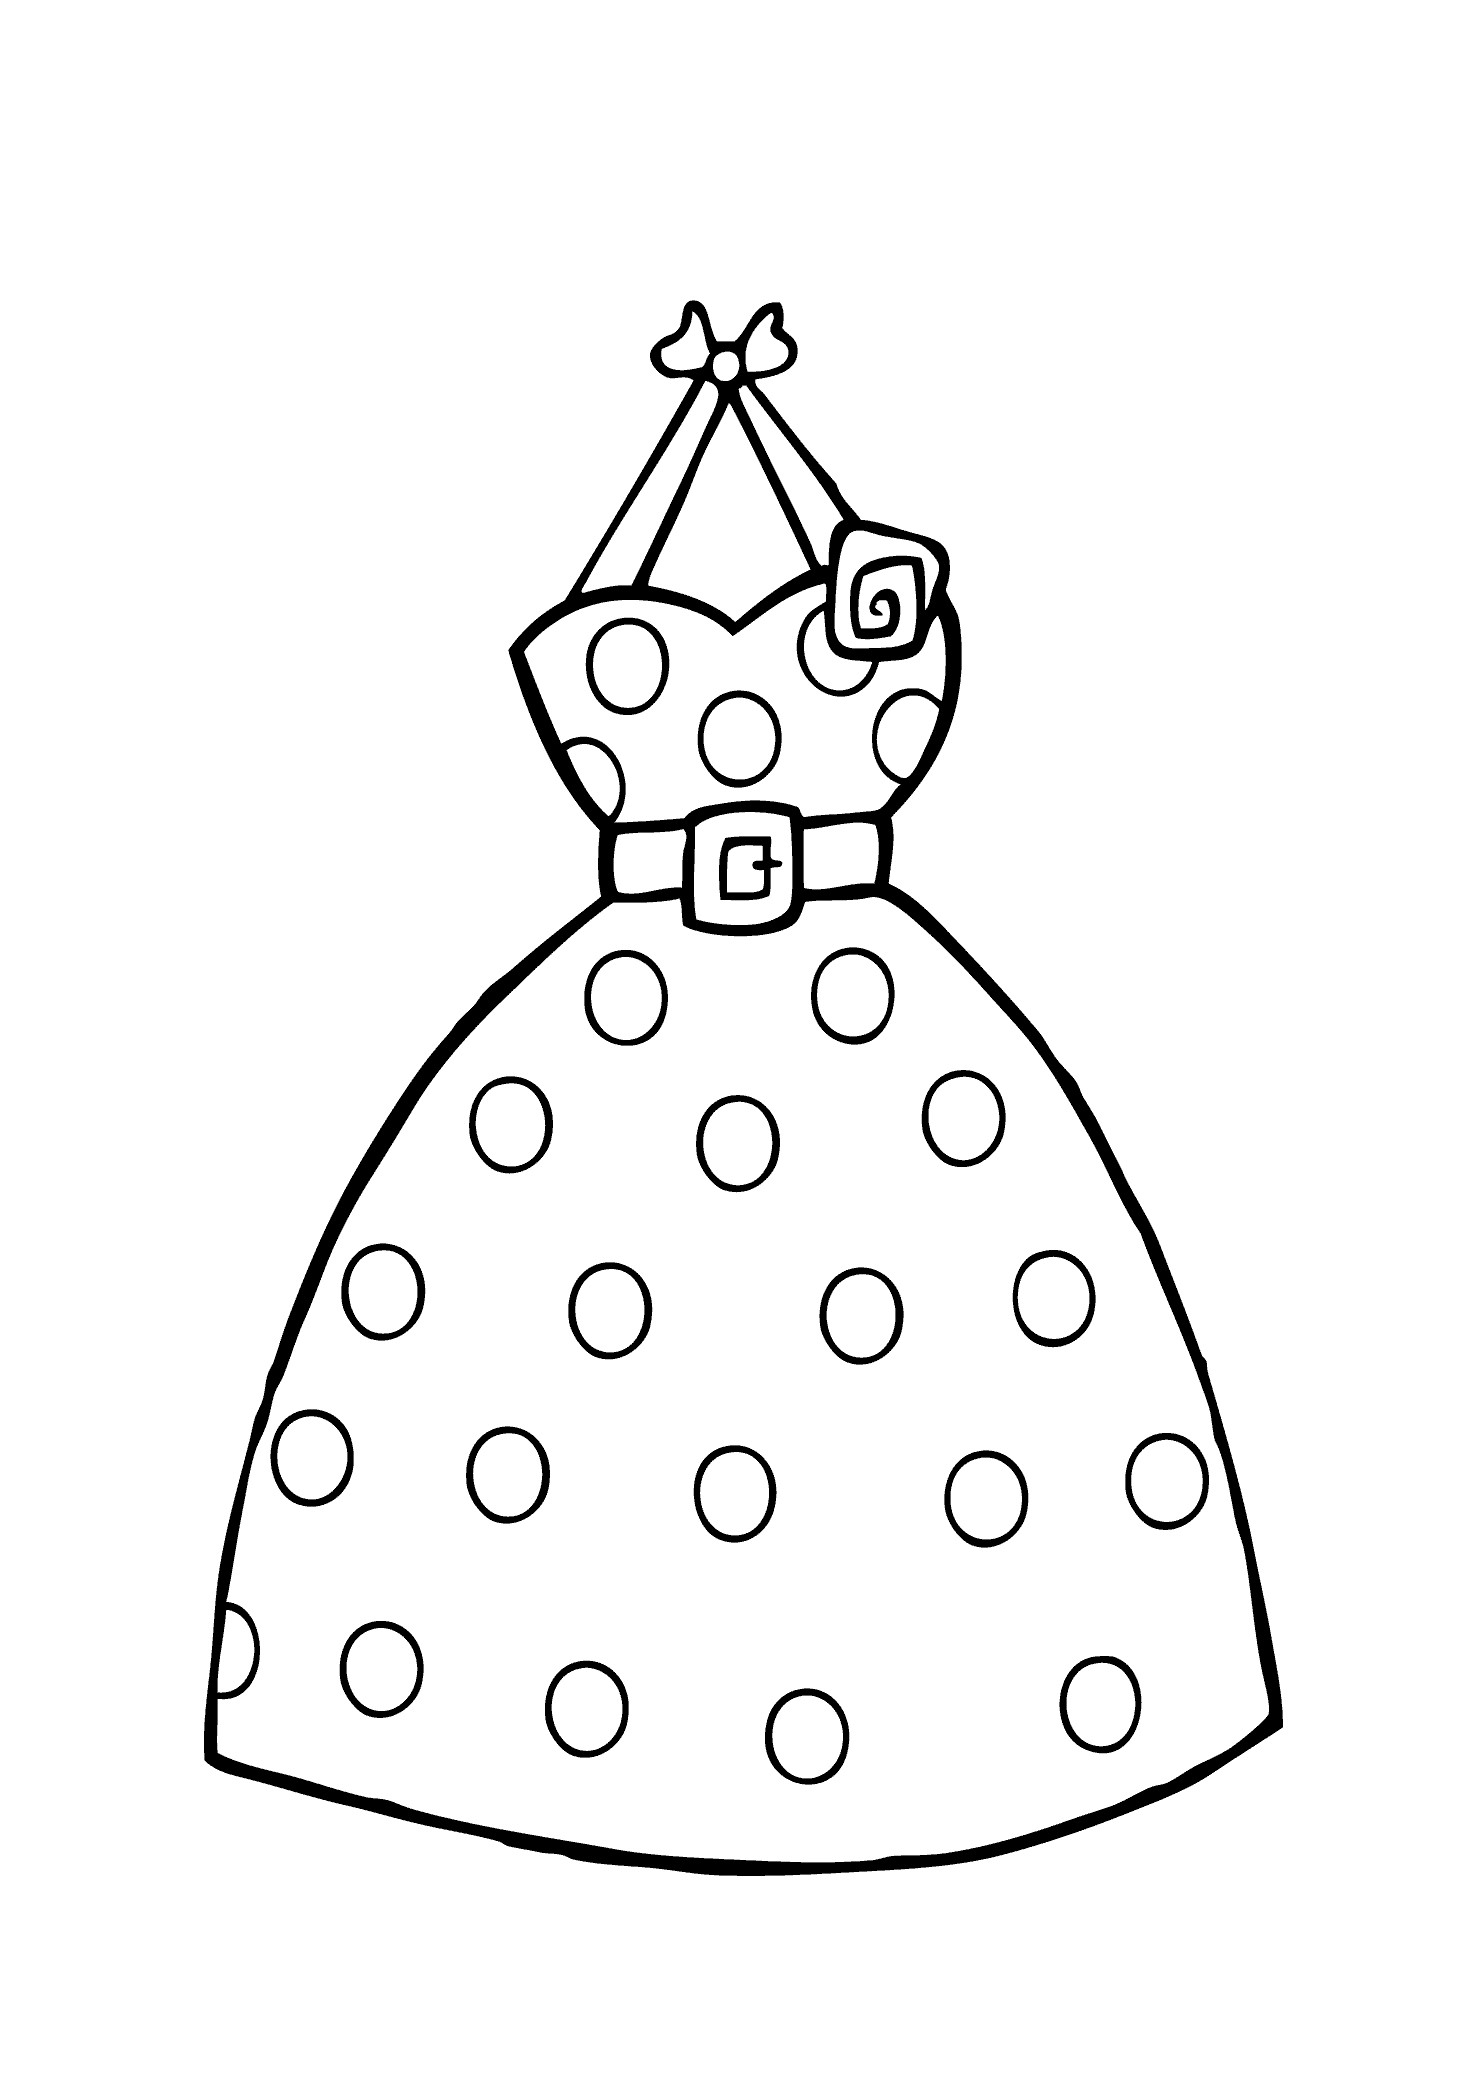 Girls Clothes Coloring Pages
 Printable Coloring Pages OF FASHION CLOTHING Coloring Home